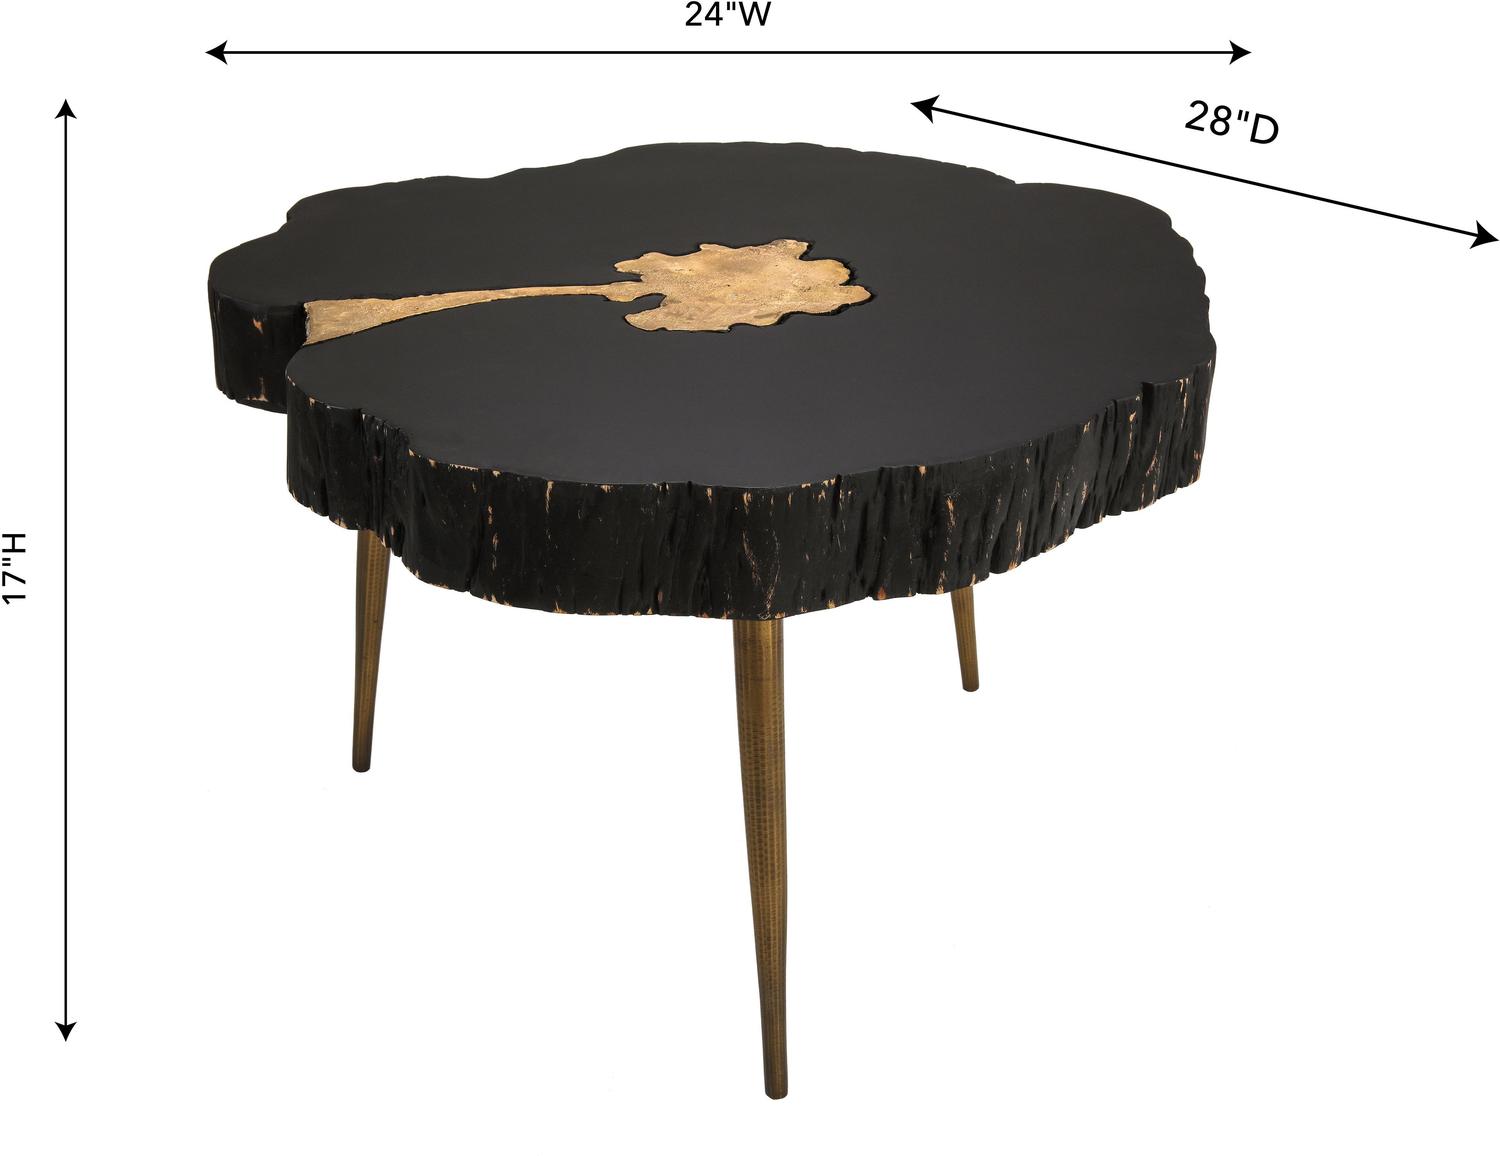 light wood side table Contemporary Design Furniture Coffee Tables Black